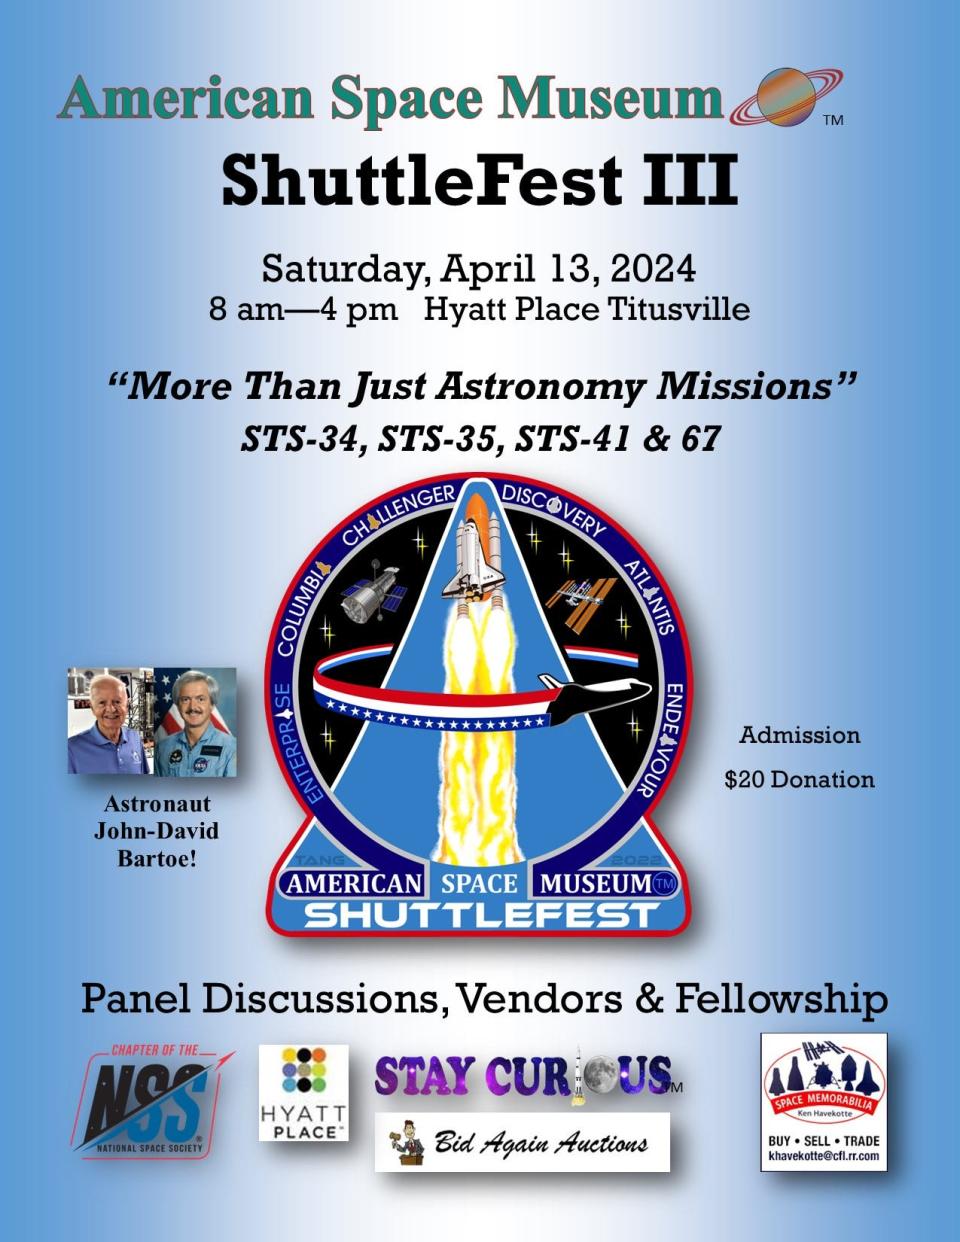 The promotional flyer for ShuttleFest III, which will be held at the Hyatt Place in Titusville on Saturday, April 13th.